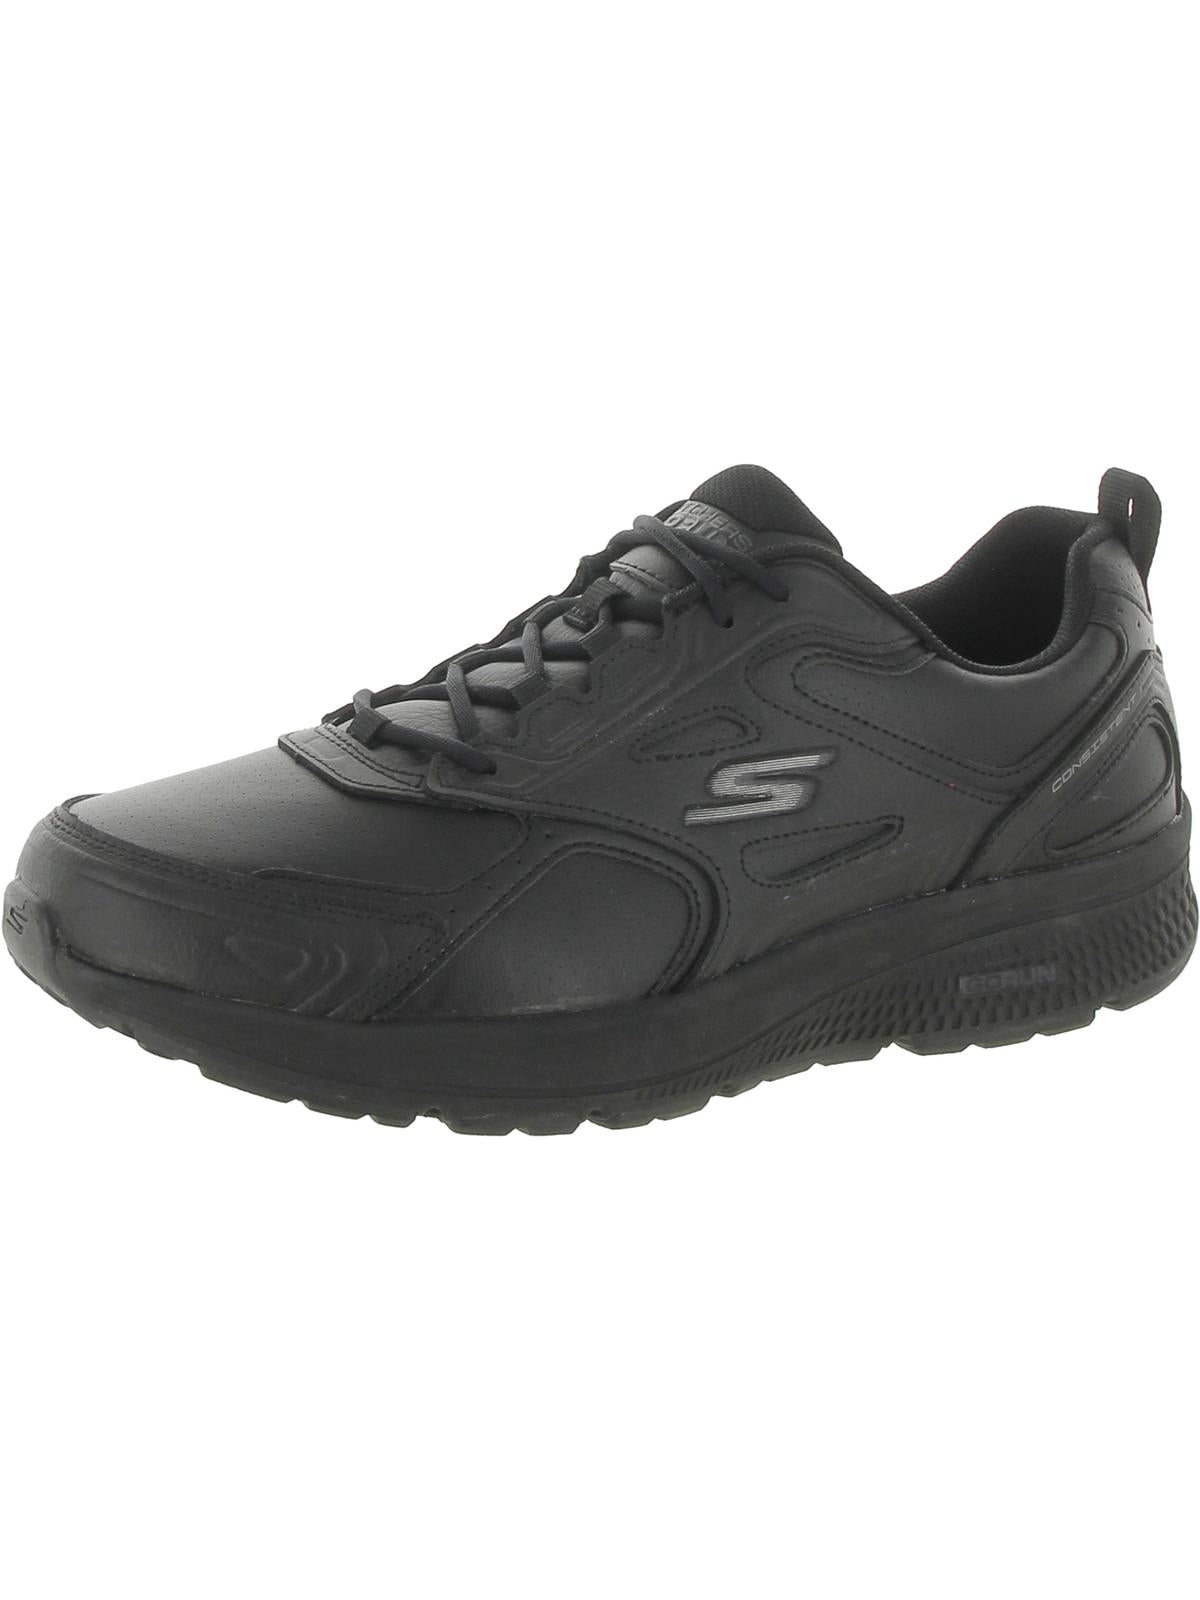 Skechers Go Run Consistent-Up Time Mens Exercise Performance Running Shoes US 10.5 male